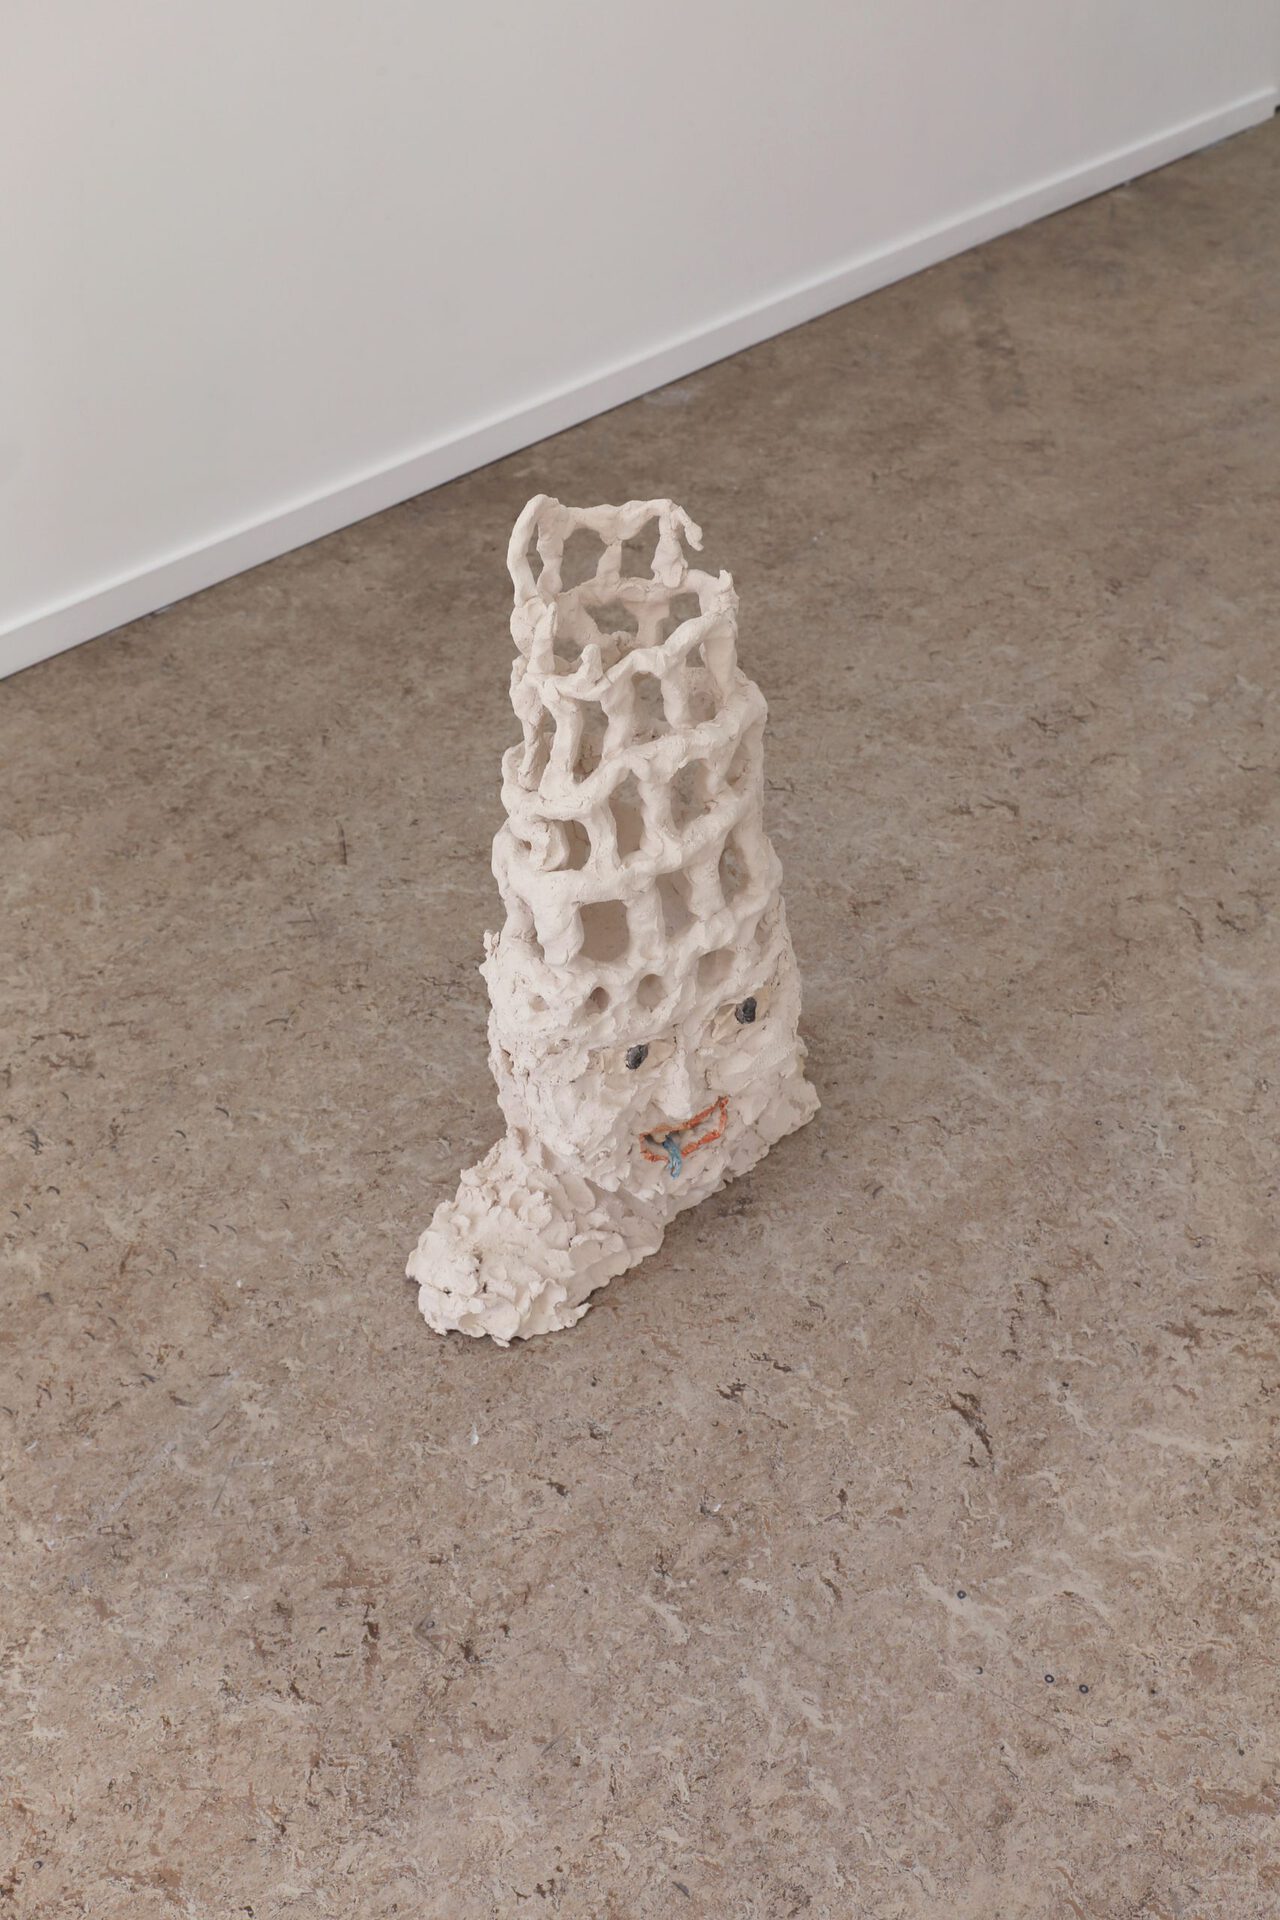 Steven Pul, untitled, fired clay, 2020